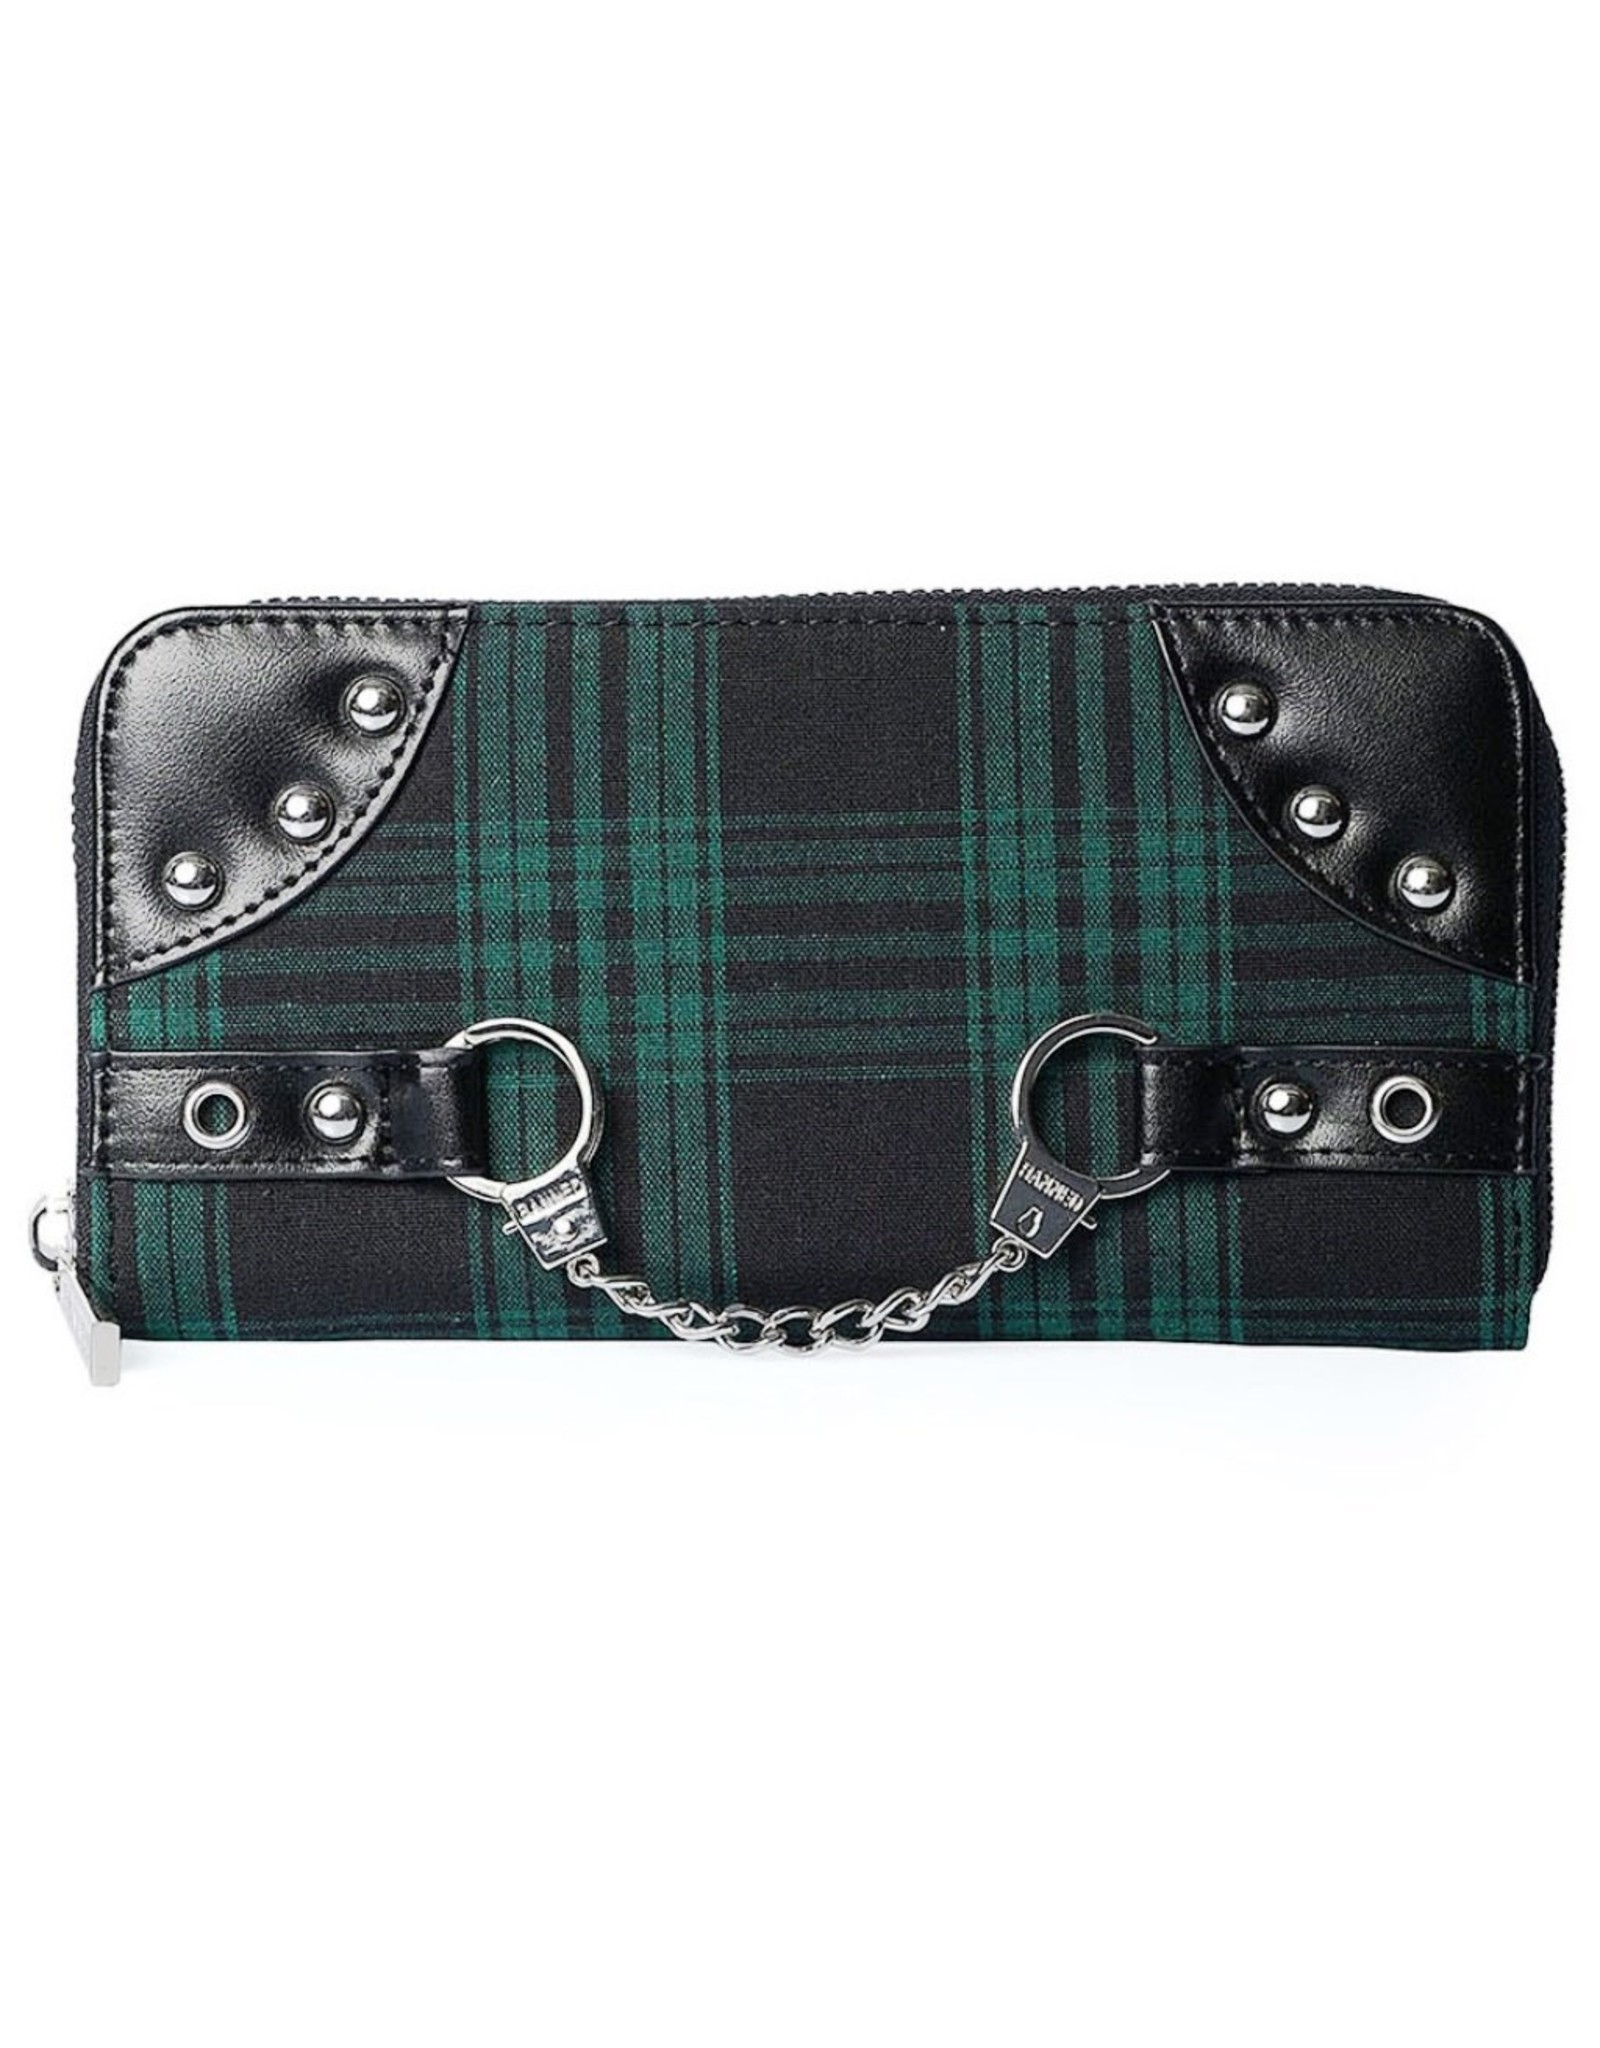 Banned Gothic wallets and Purses - Tartan Wallet with Handcuffs (green)